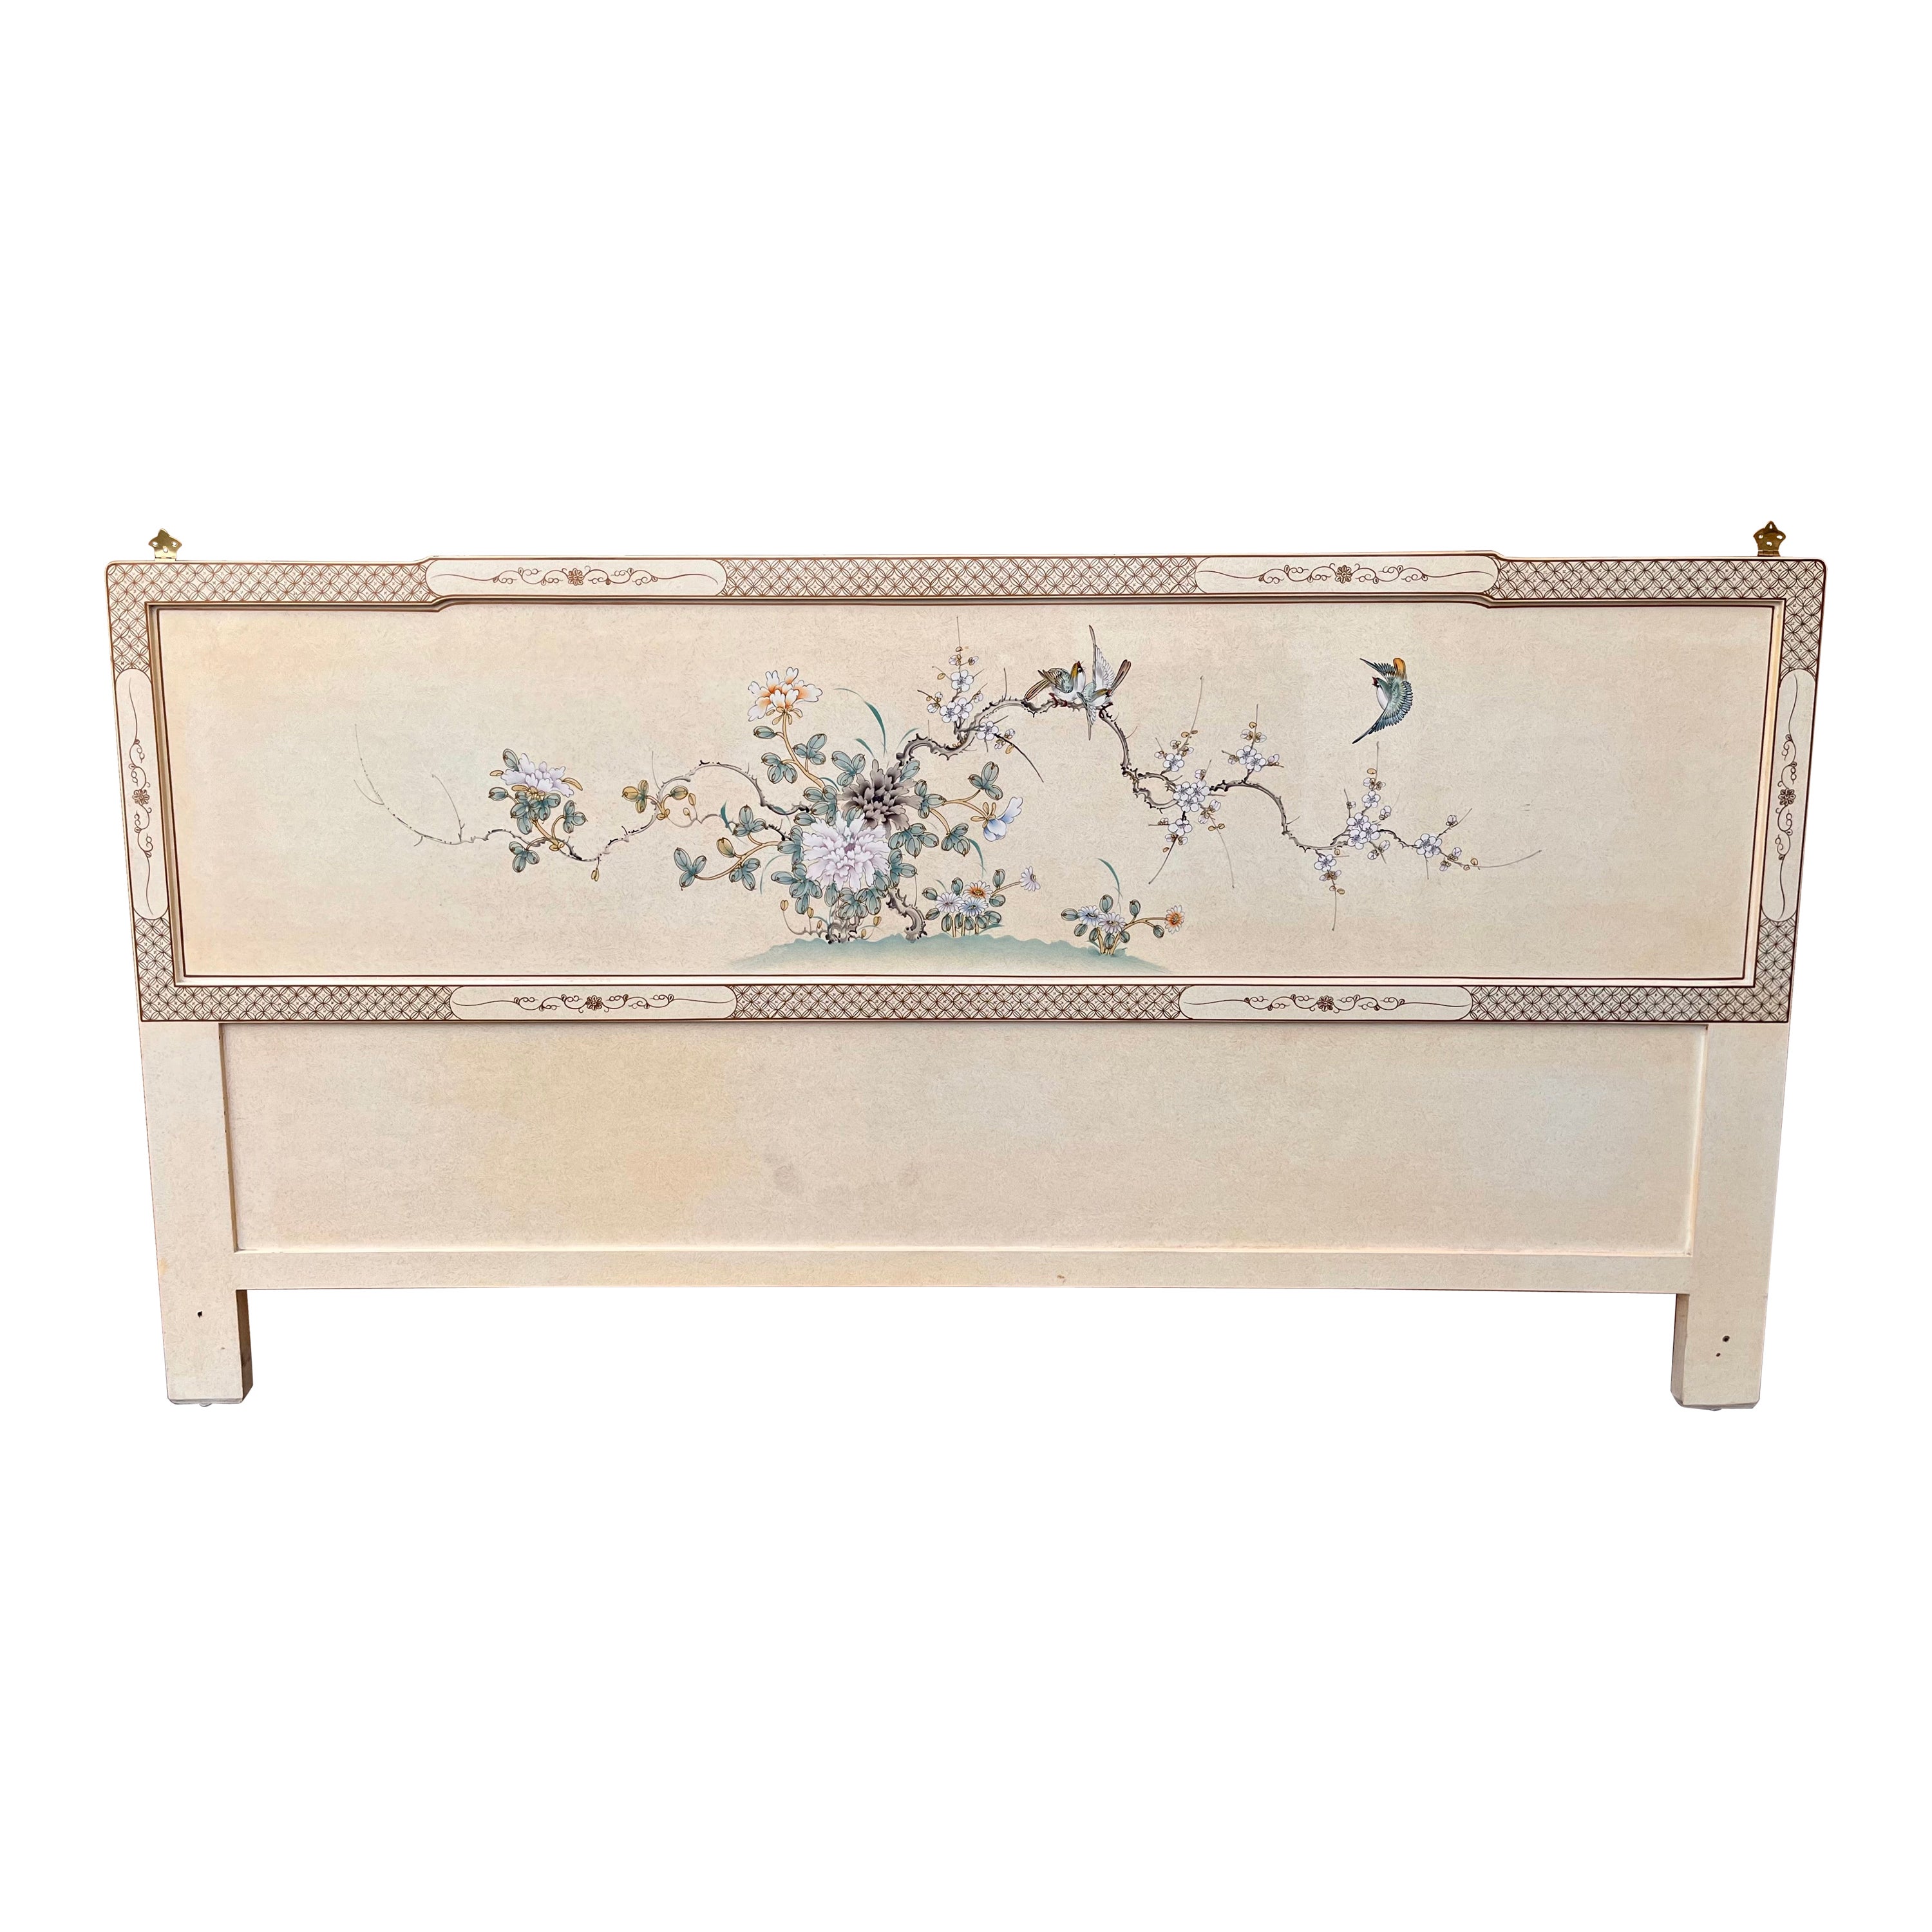 Late 20th Century Chinoiserie Lacquer King Size Headboard